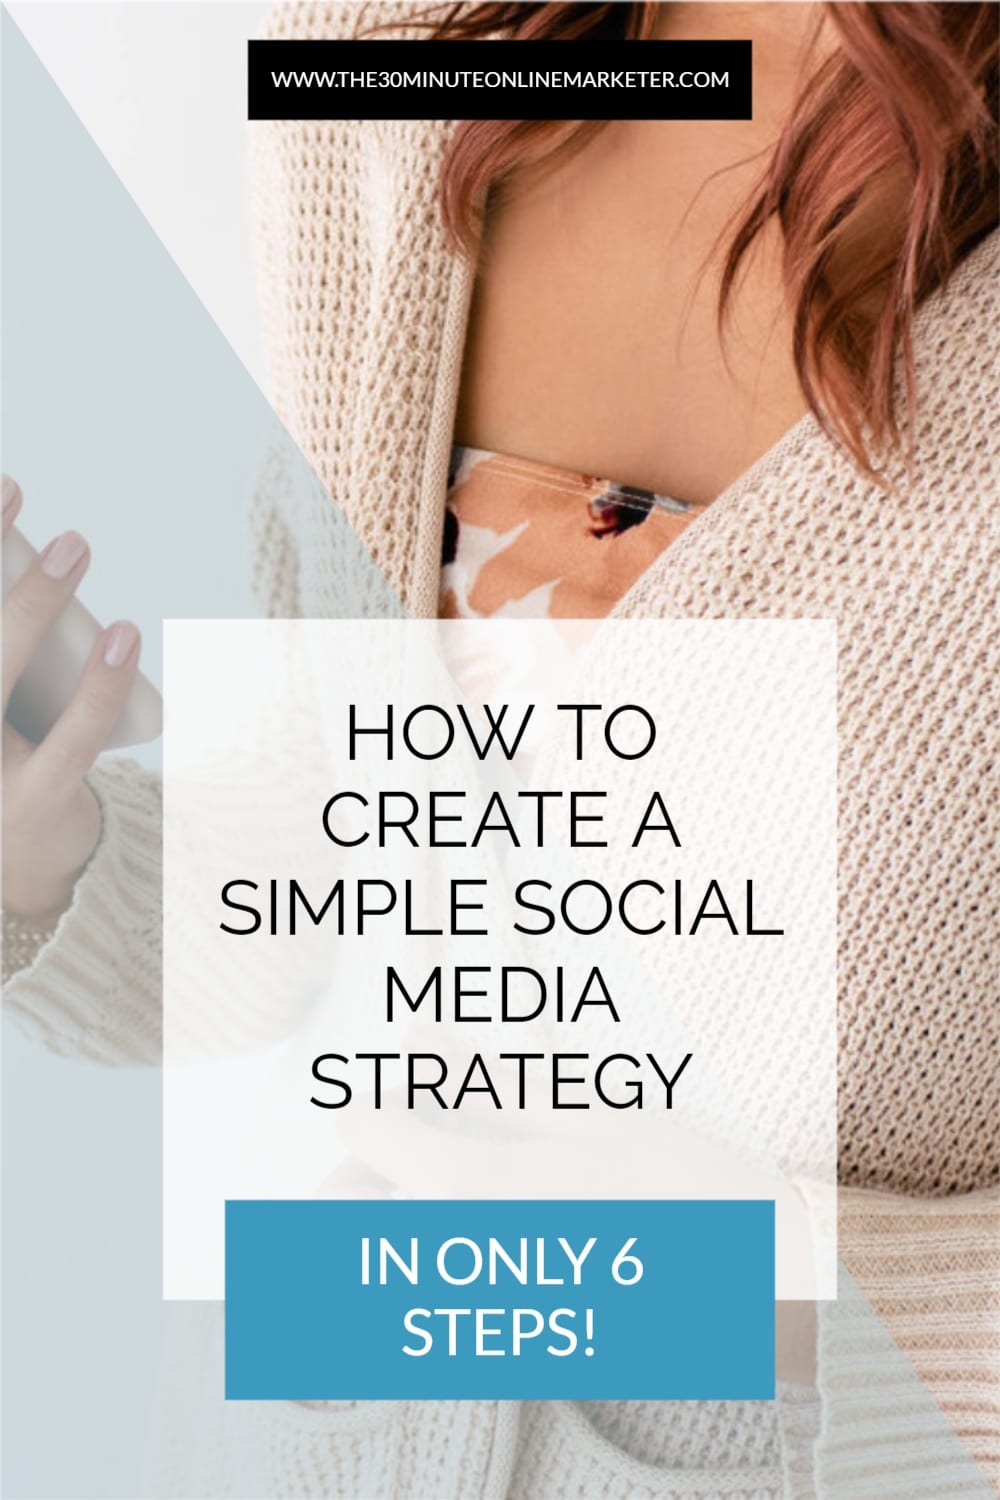 Create a Social Media Strategy in 6 Super-Simple Steps